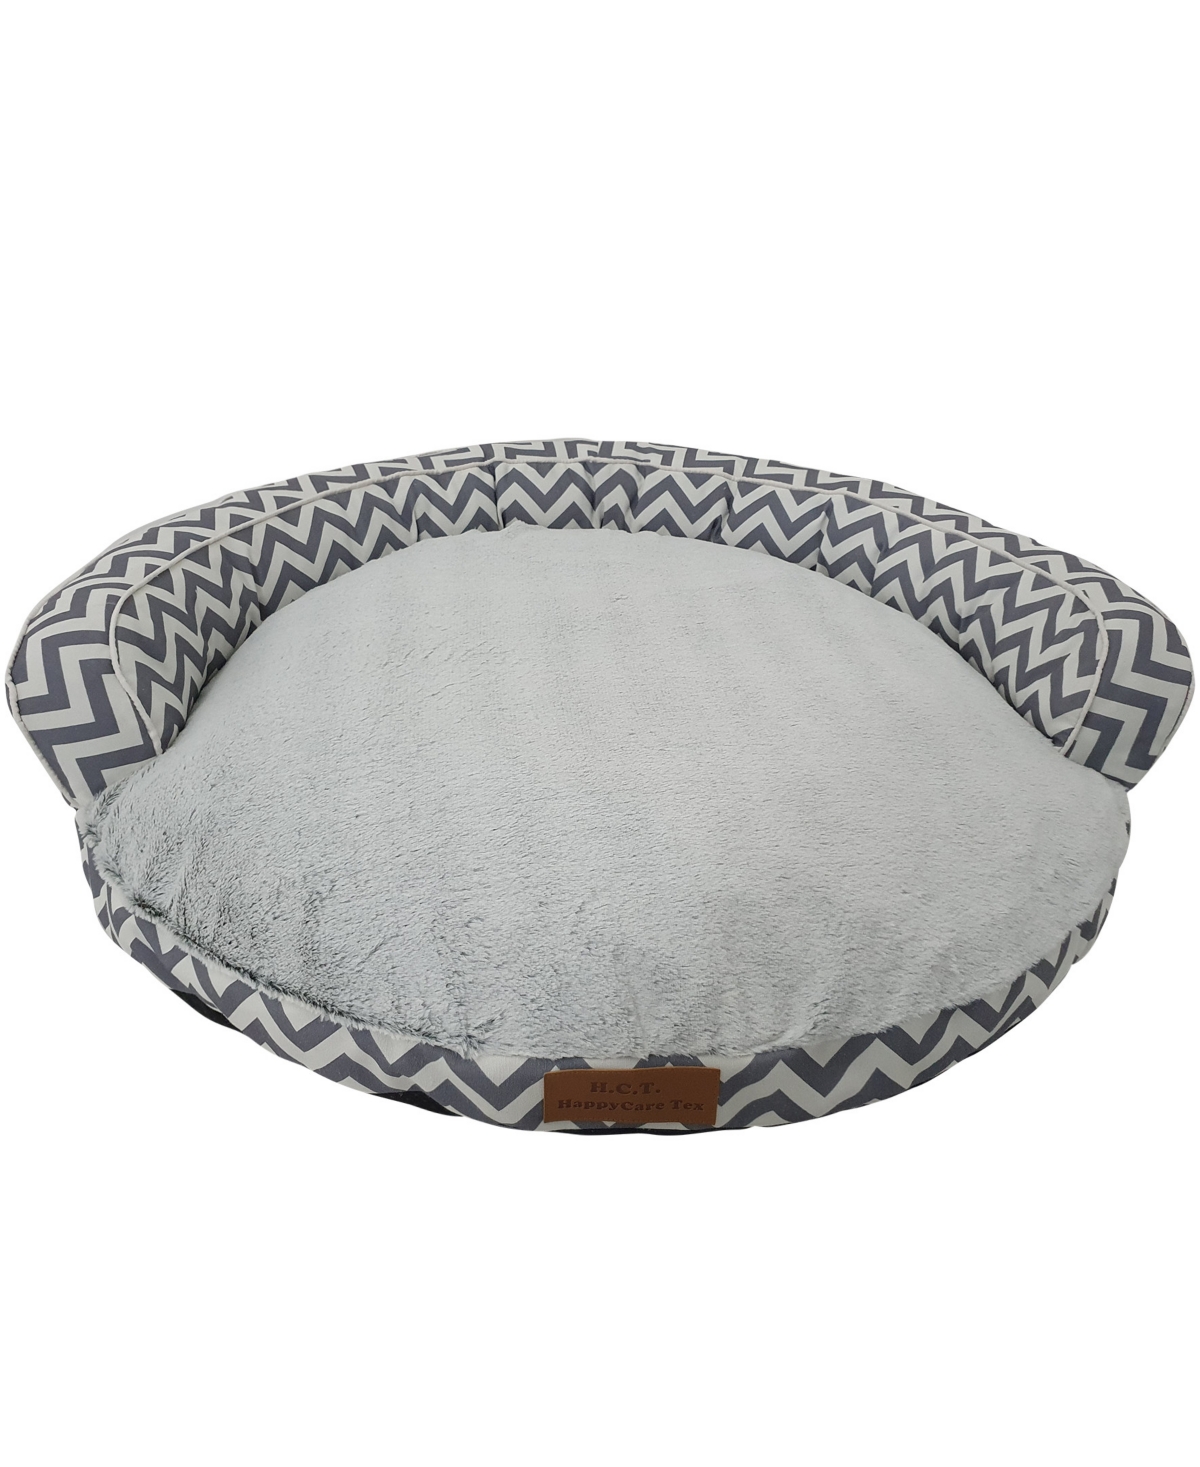 Macy's Canvas Round Pet Sofa Bed, Extra Large In Chevron Gray